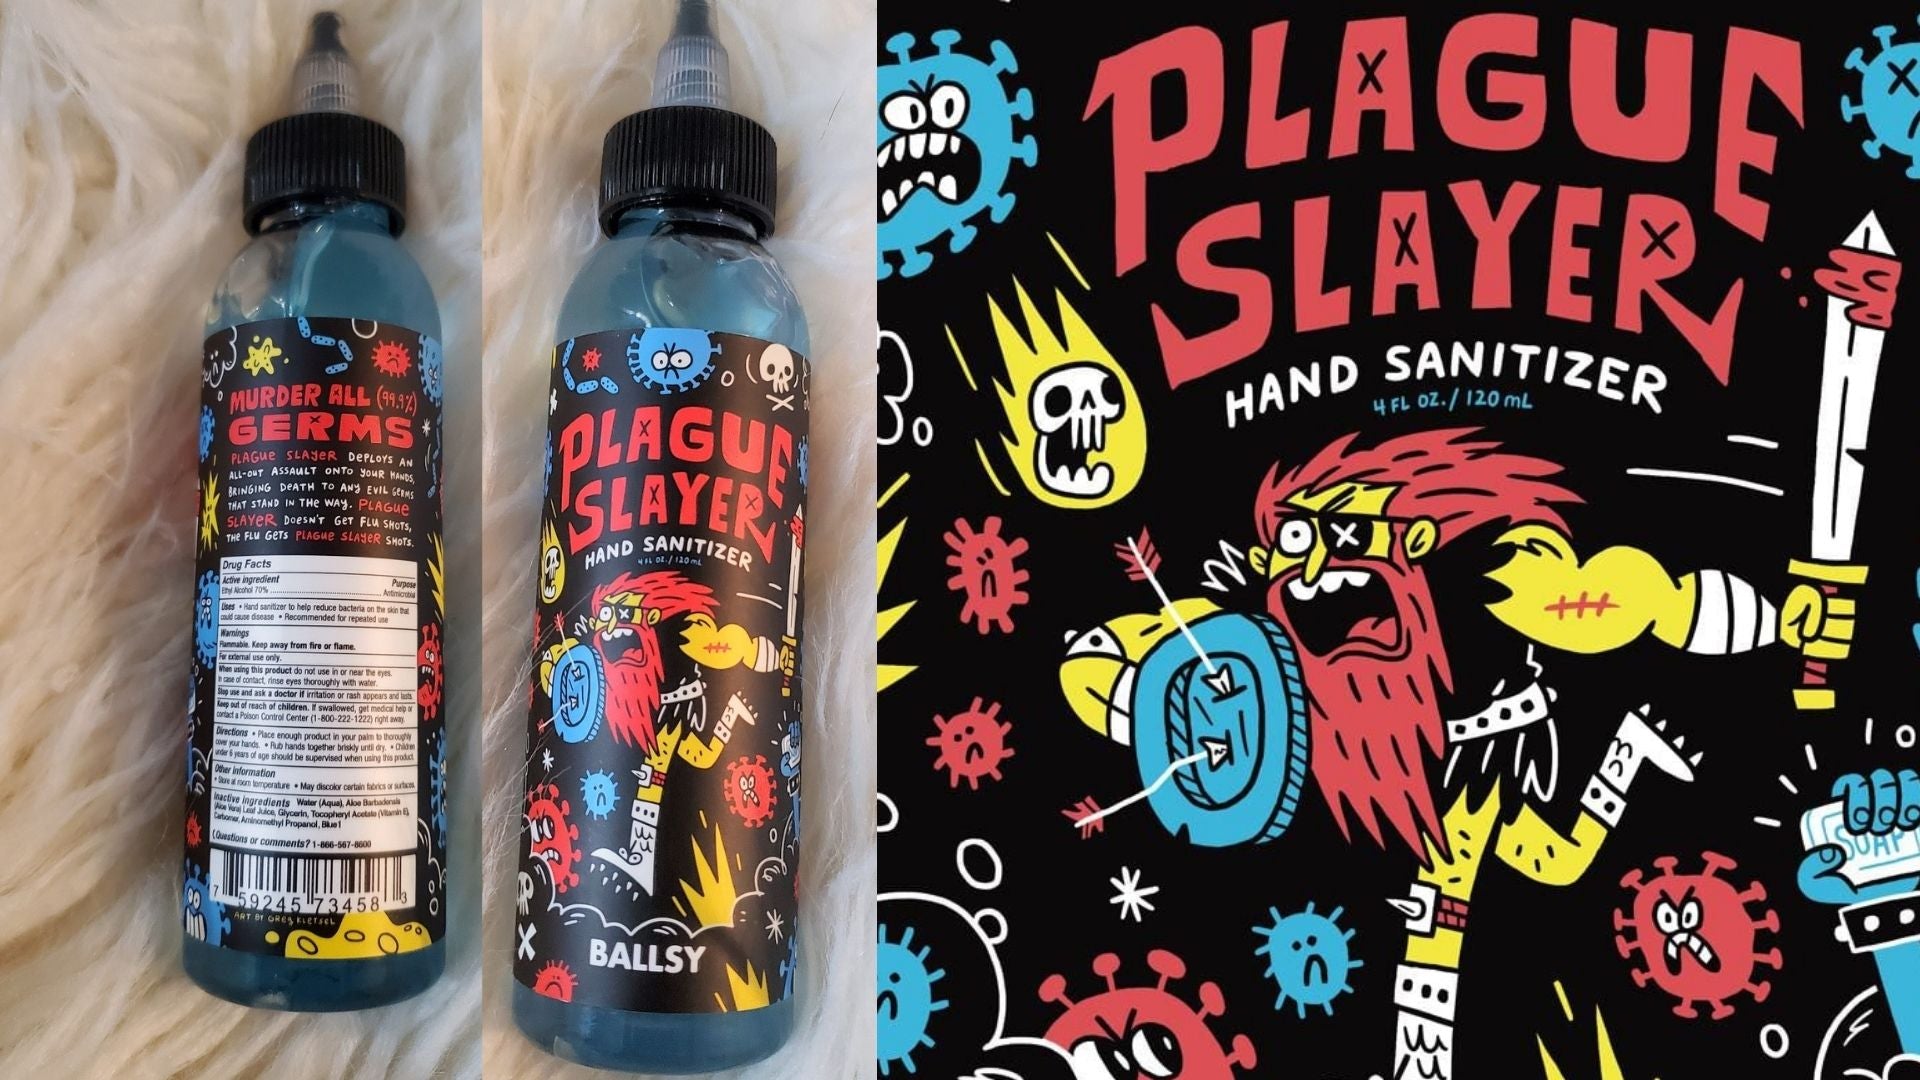 review, skincare, ingredients, photos, trends, ballsy, plague slayer, hand sanitizer, personal protection equipment, where to find hand saniziter during the pandemic